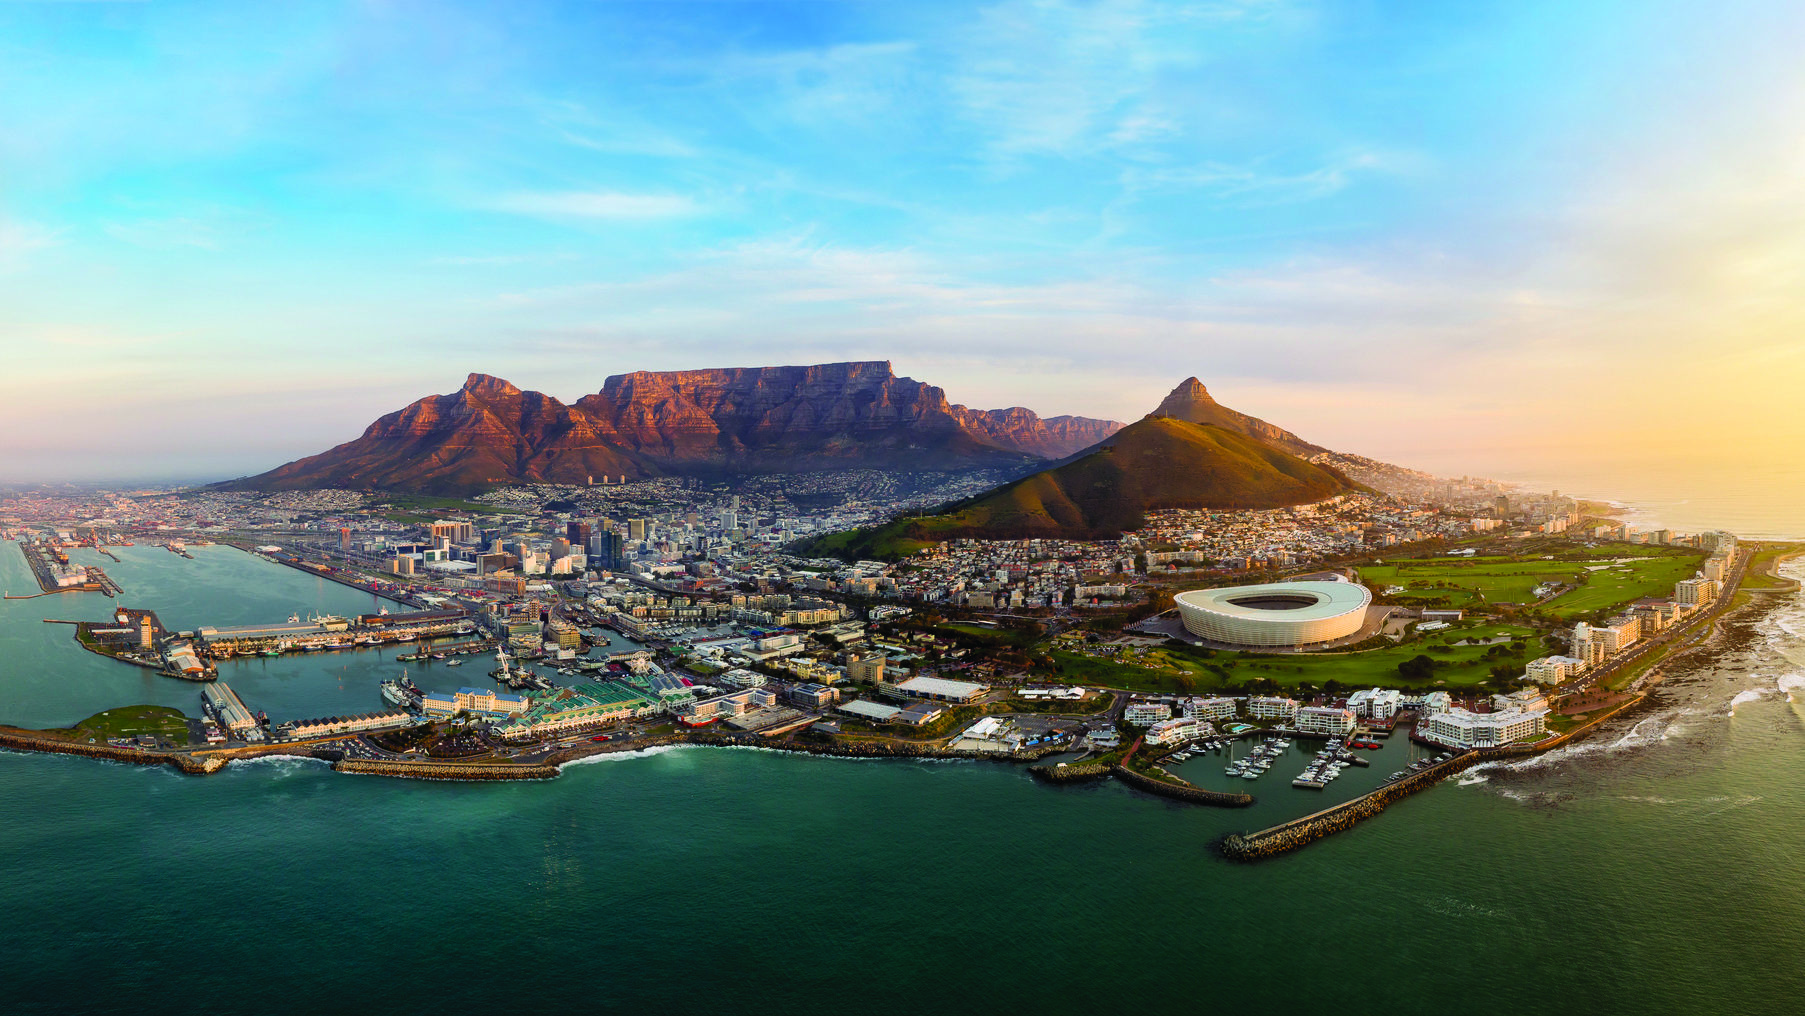 Cape Town aerial view